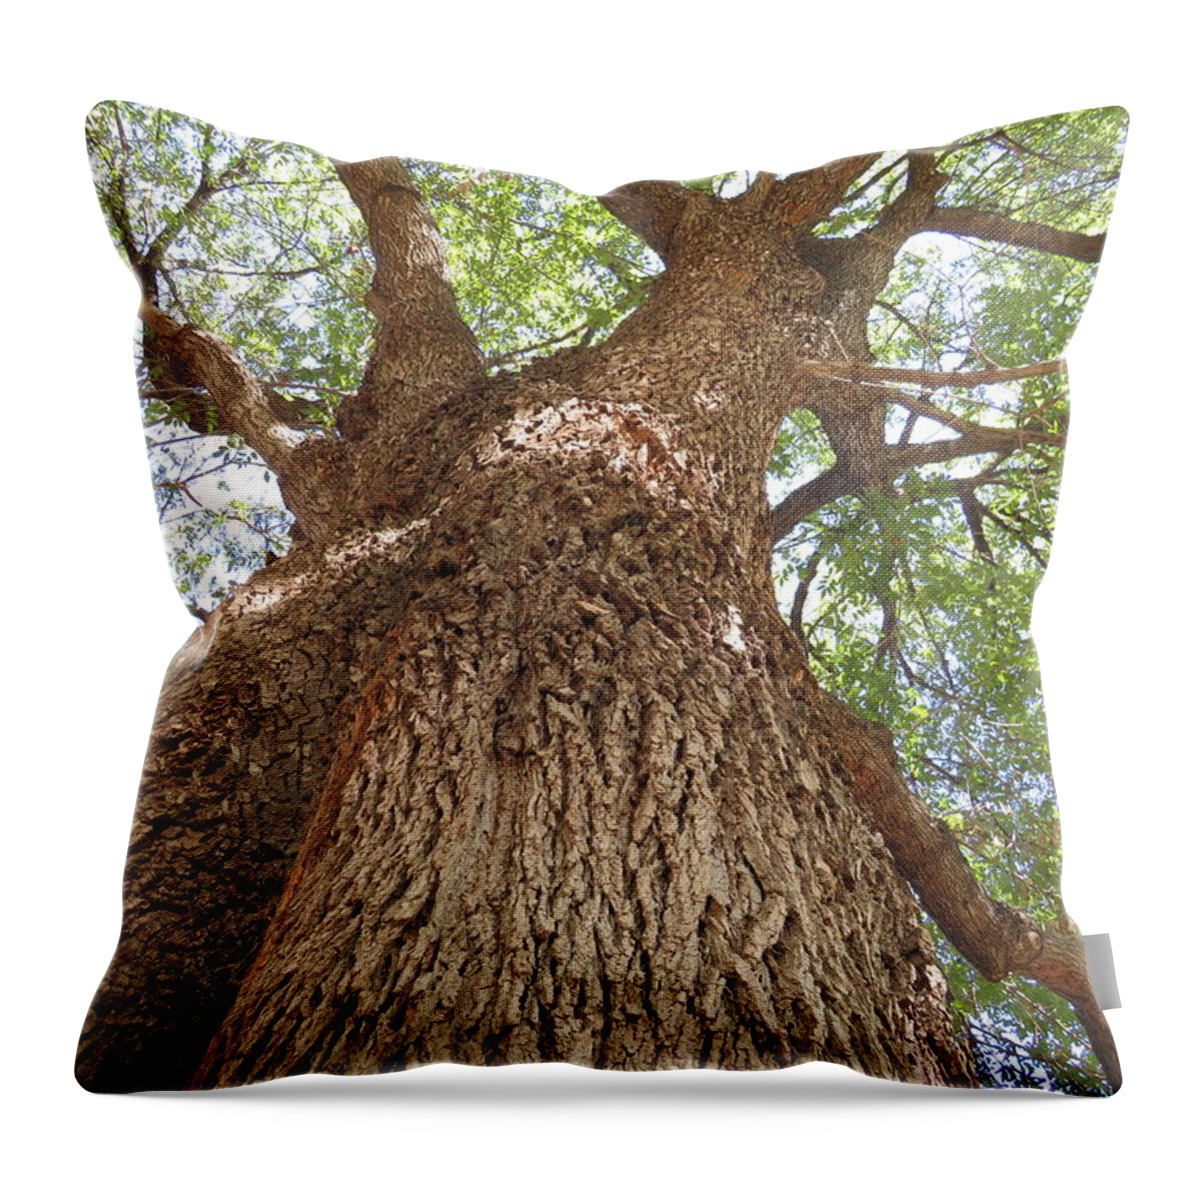  Throw Pillow featuring the photograph Tree Giant by Raymond Fernandez